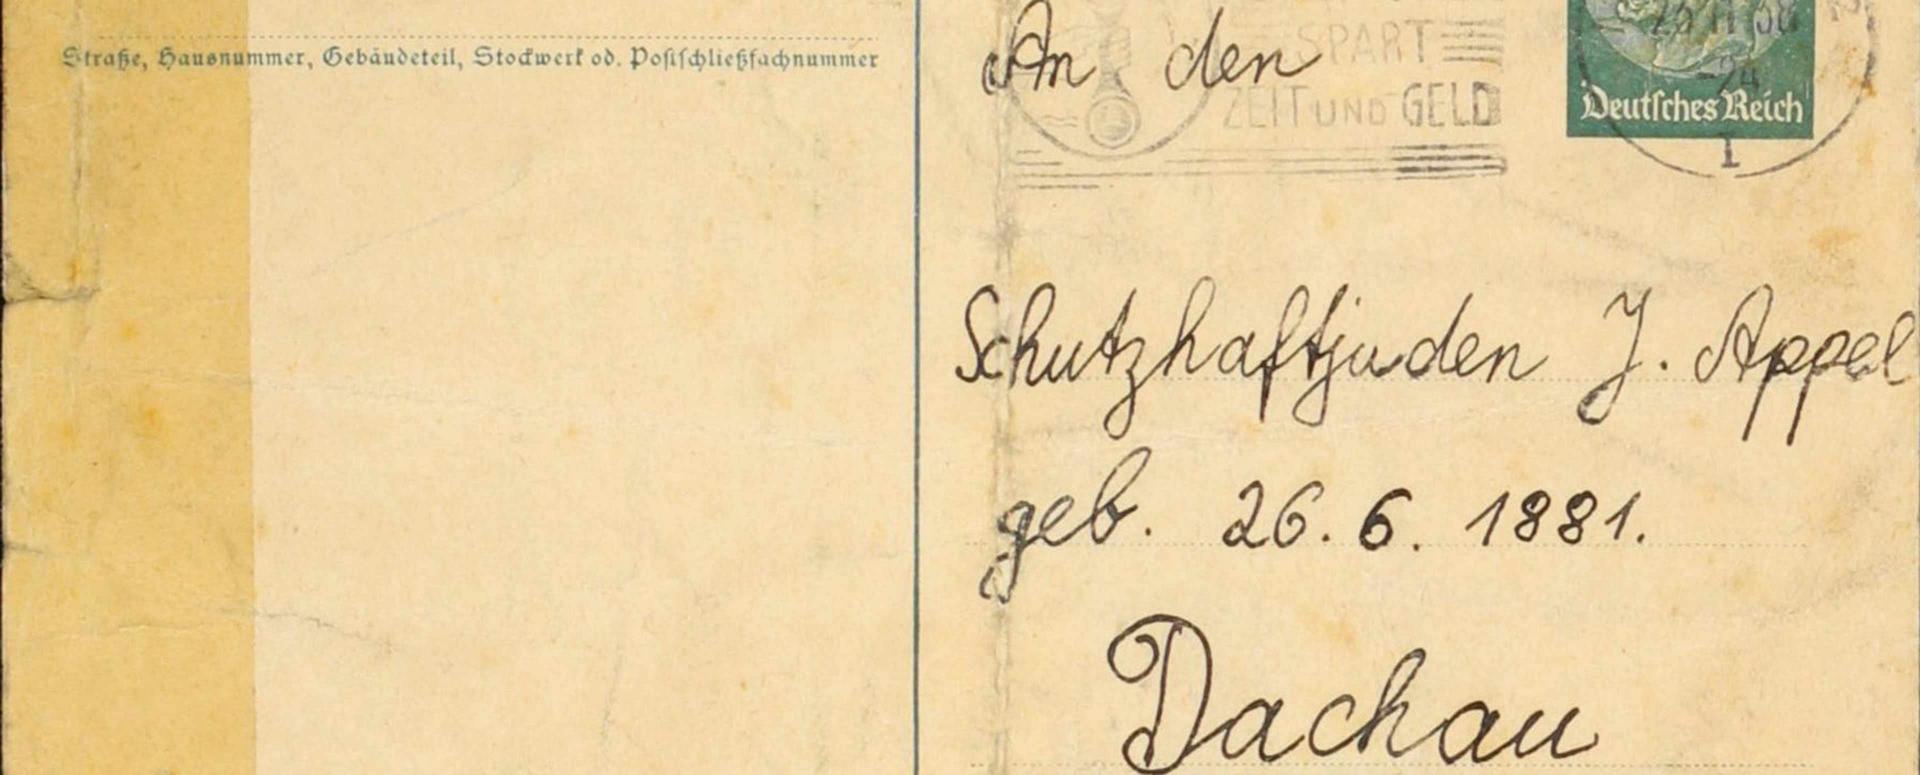 The other side of a postcard addressed "to the protective custody Jew J. Appel" in "Dachau".